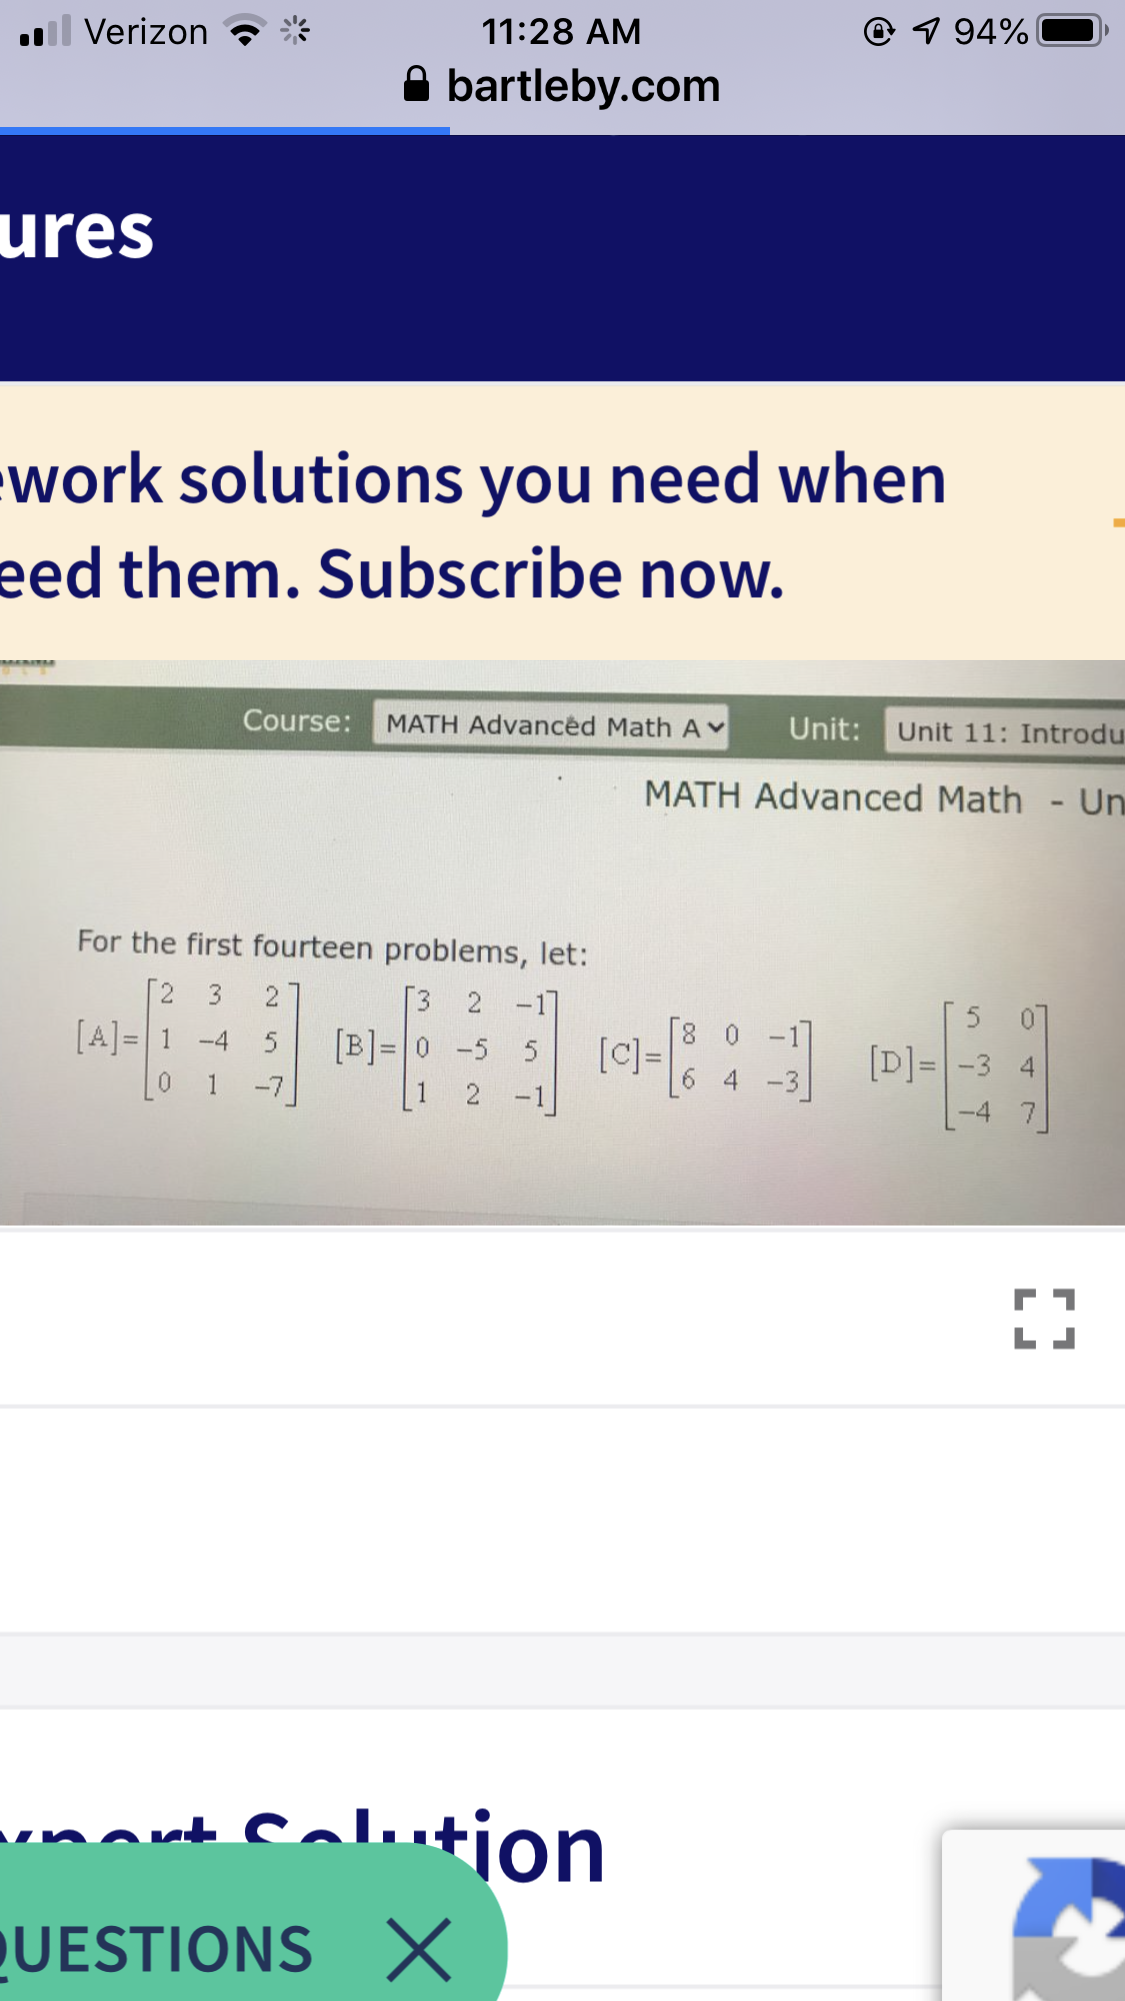 l Verizon
11:28 AM
@ 1 94%
A bartleby.com
ures
work solutions you need when
eed them. Subscribe now.
Course:
MATH Advanced Math AY
Unit:
Unit 11: Introdu
MATH Advanced Math - Un
For the first fourteen problems, let:
2
3
[3 2
-17
[A] = 1 -4 5
[B]= 0 -5 5
-7
8 0 -1
[]=
[D]= -3 4
1
4 -3
2 -1
-4 7
calution
ort C
QUESTIONS X
